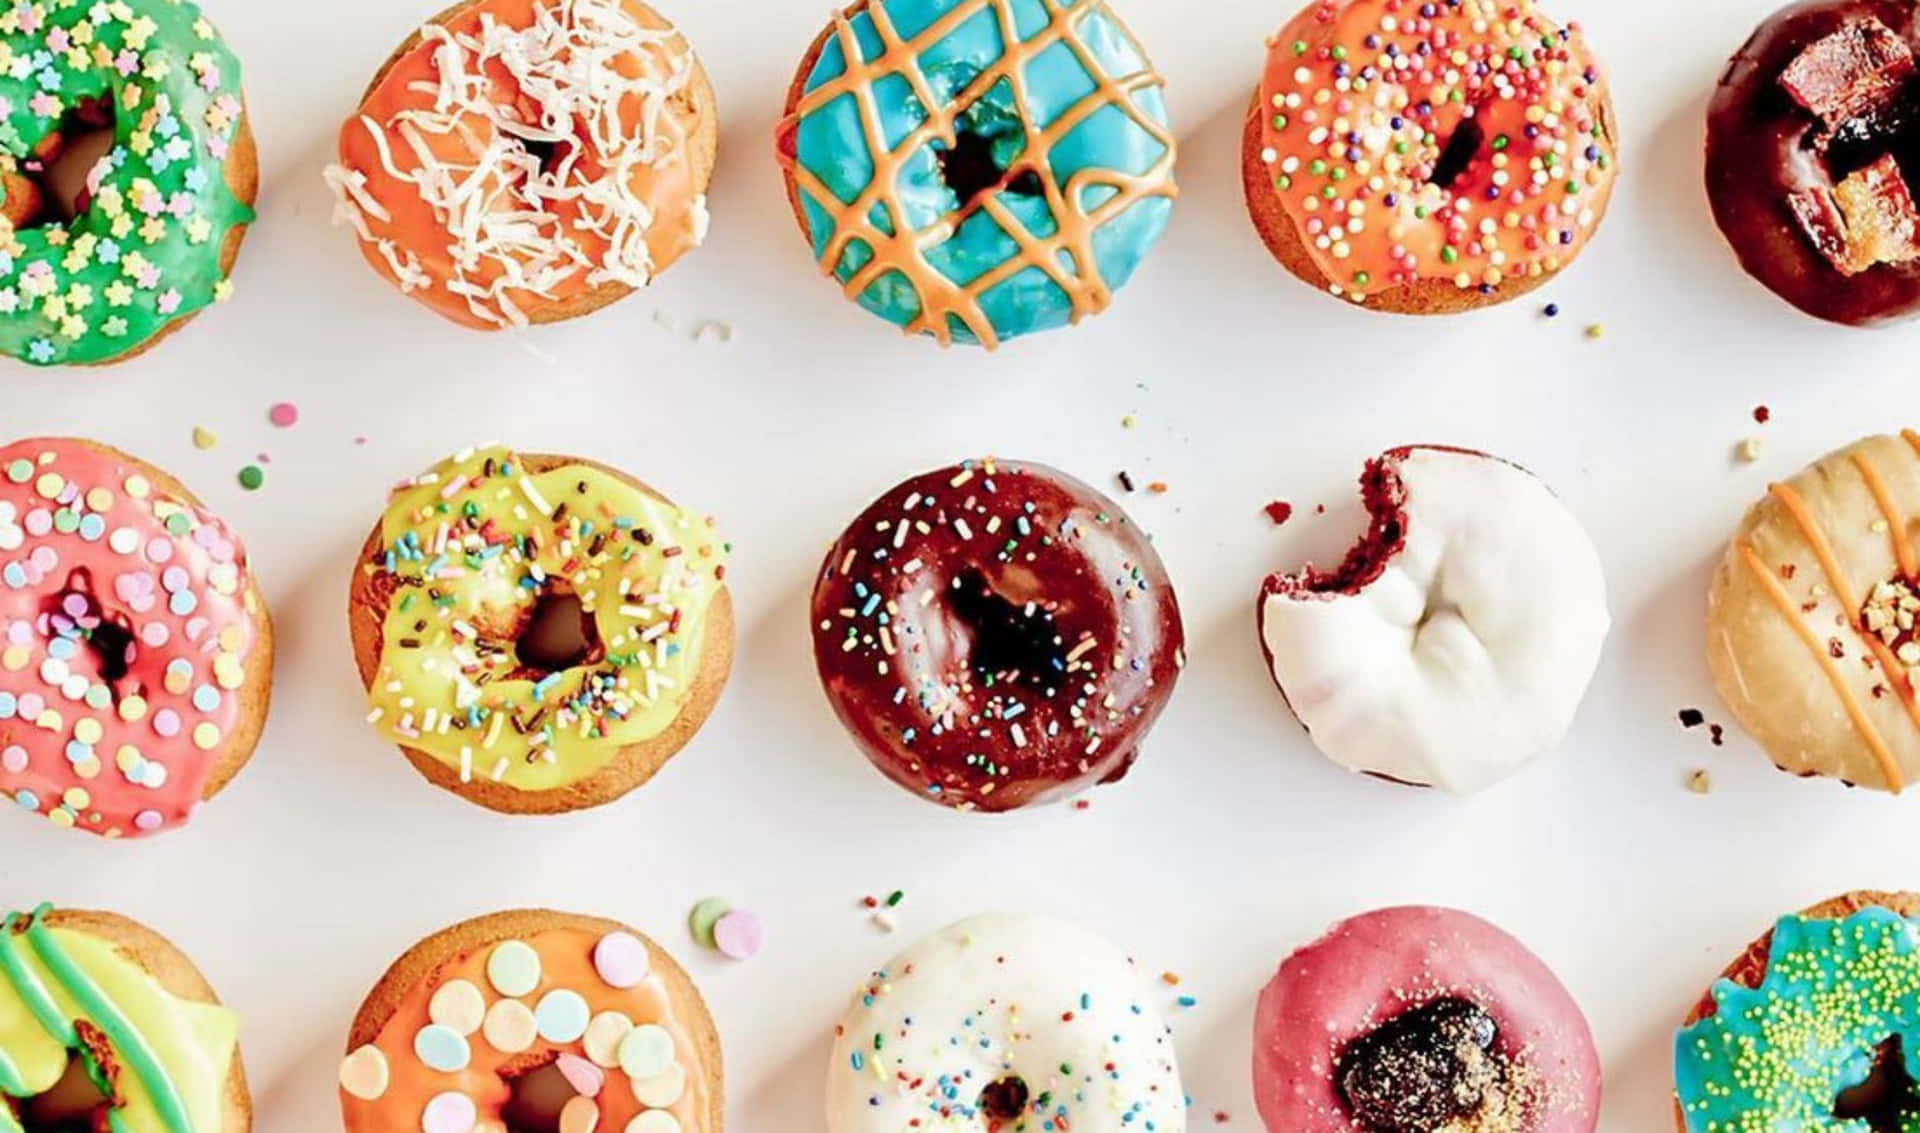 A Group Of Colorful Donuts Are Arranged On A White Surface